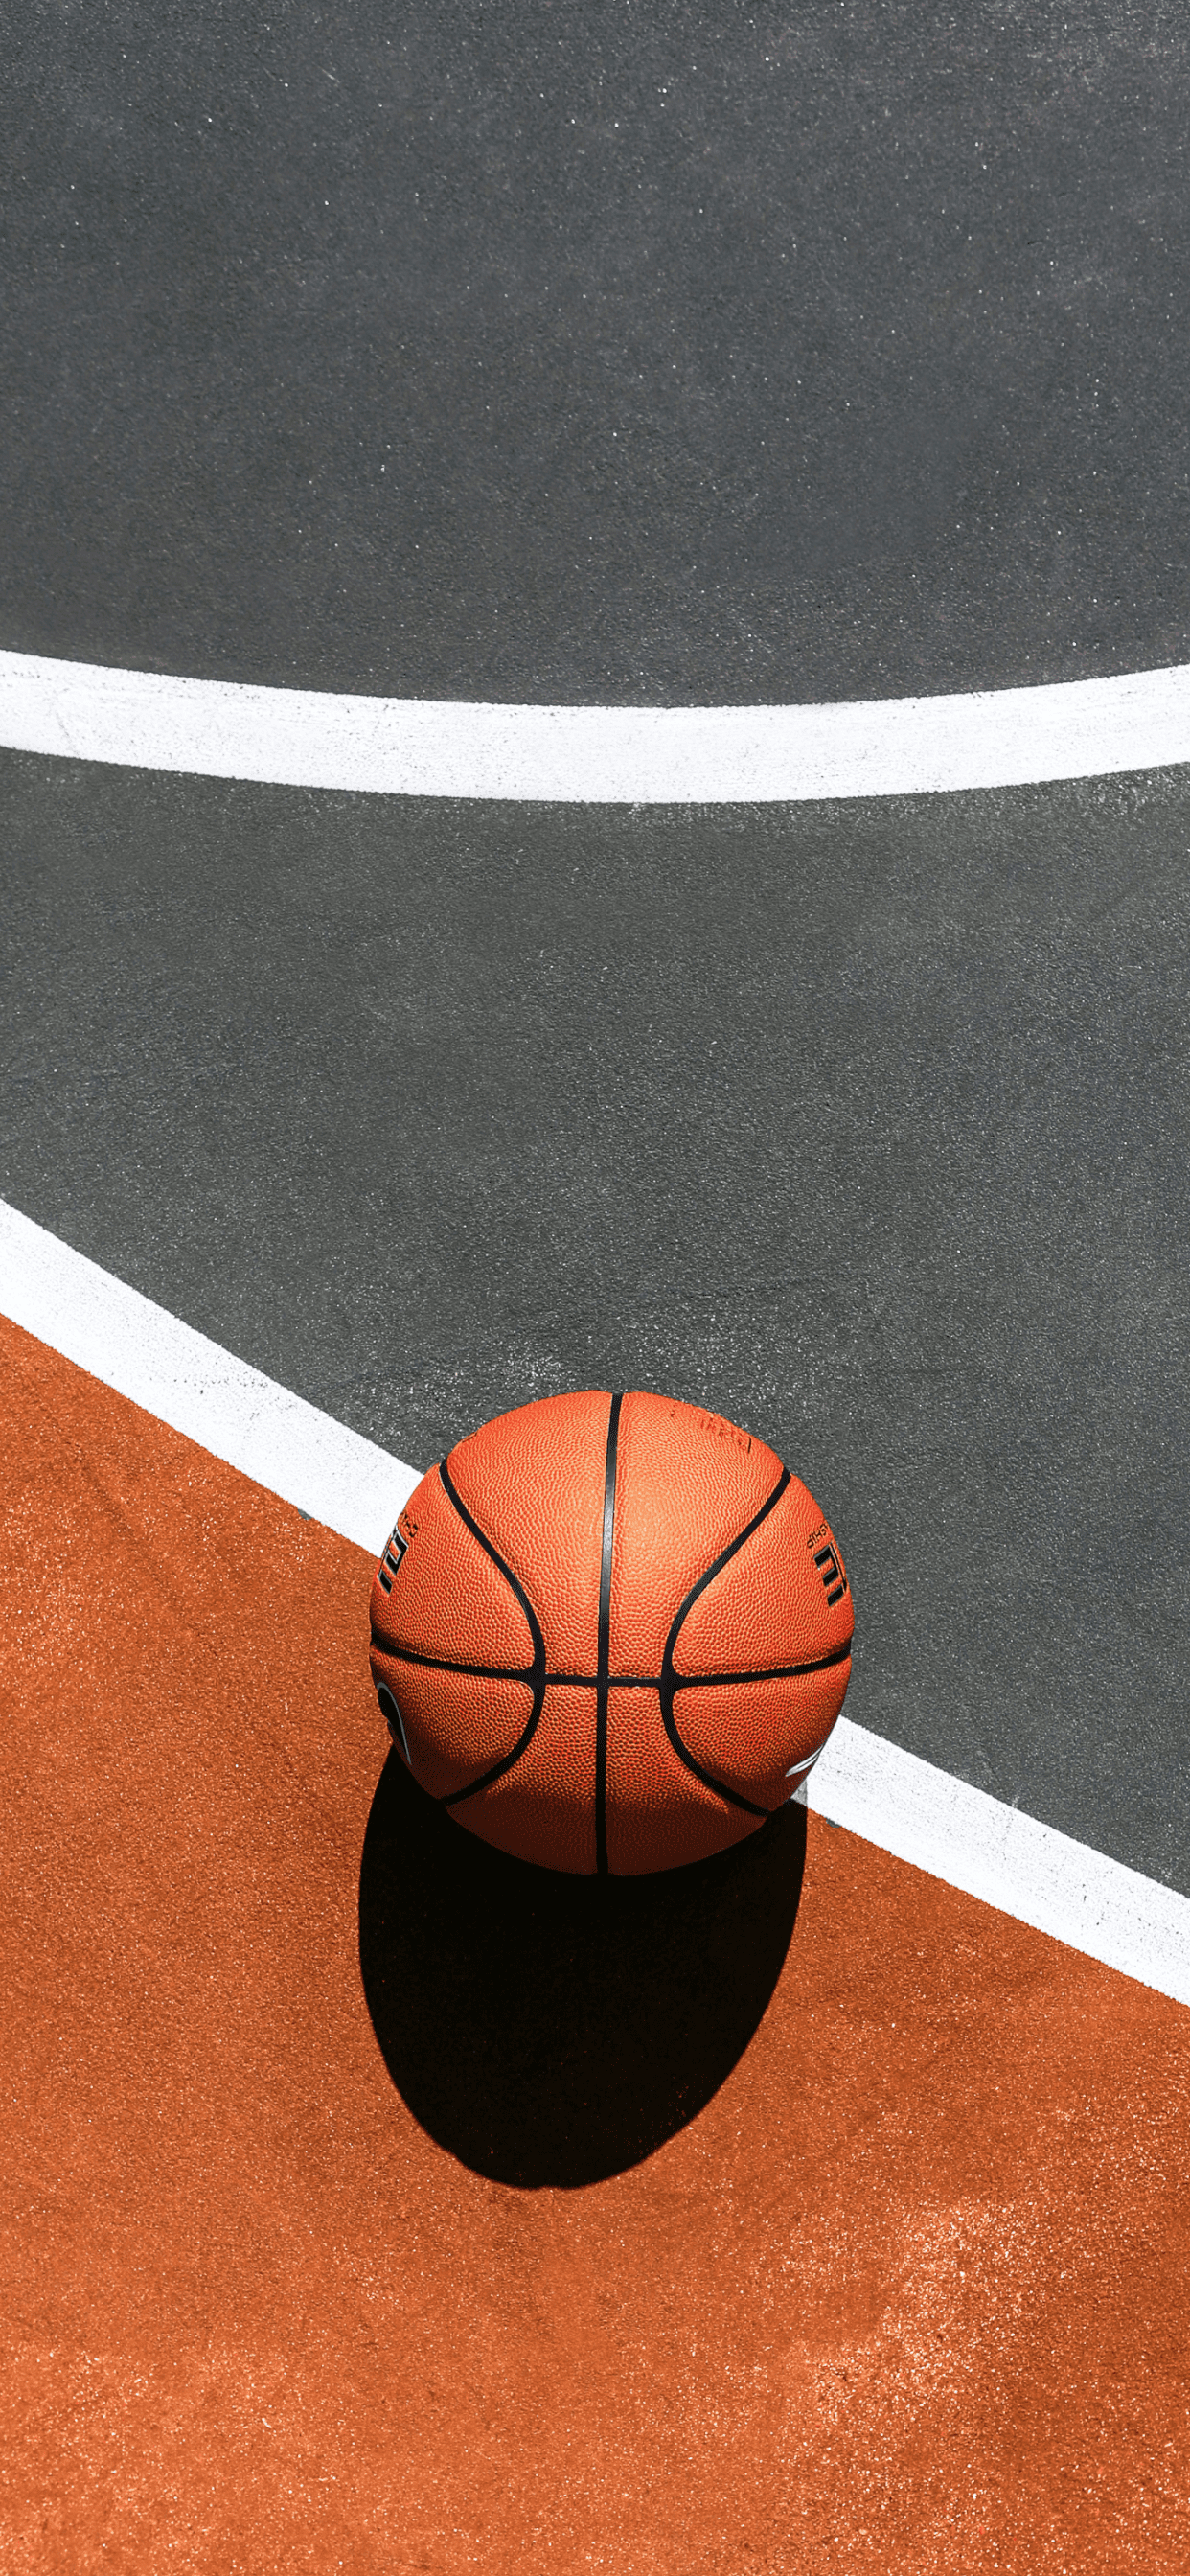 Basketball Wallpaper for iPhone Pro Max, X, 6